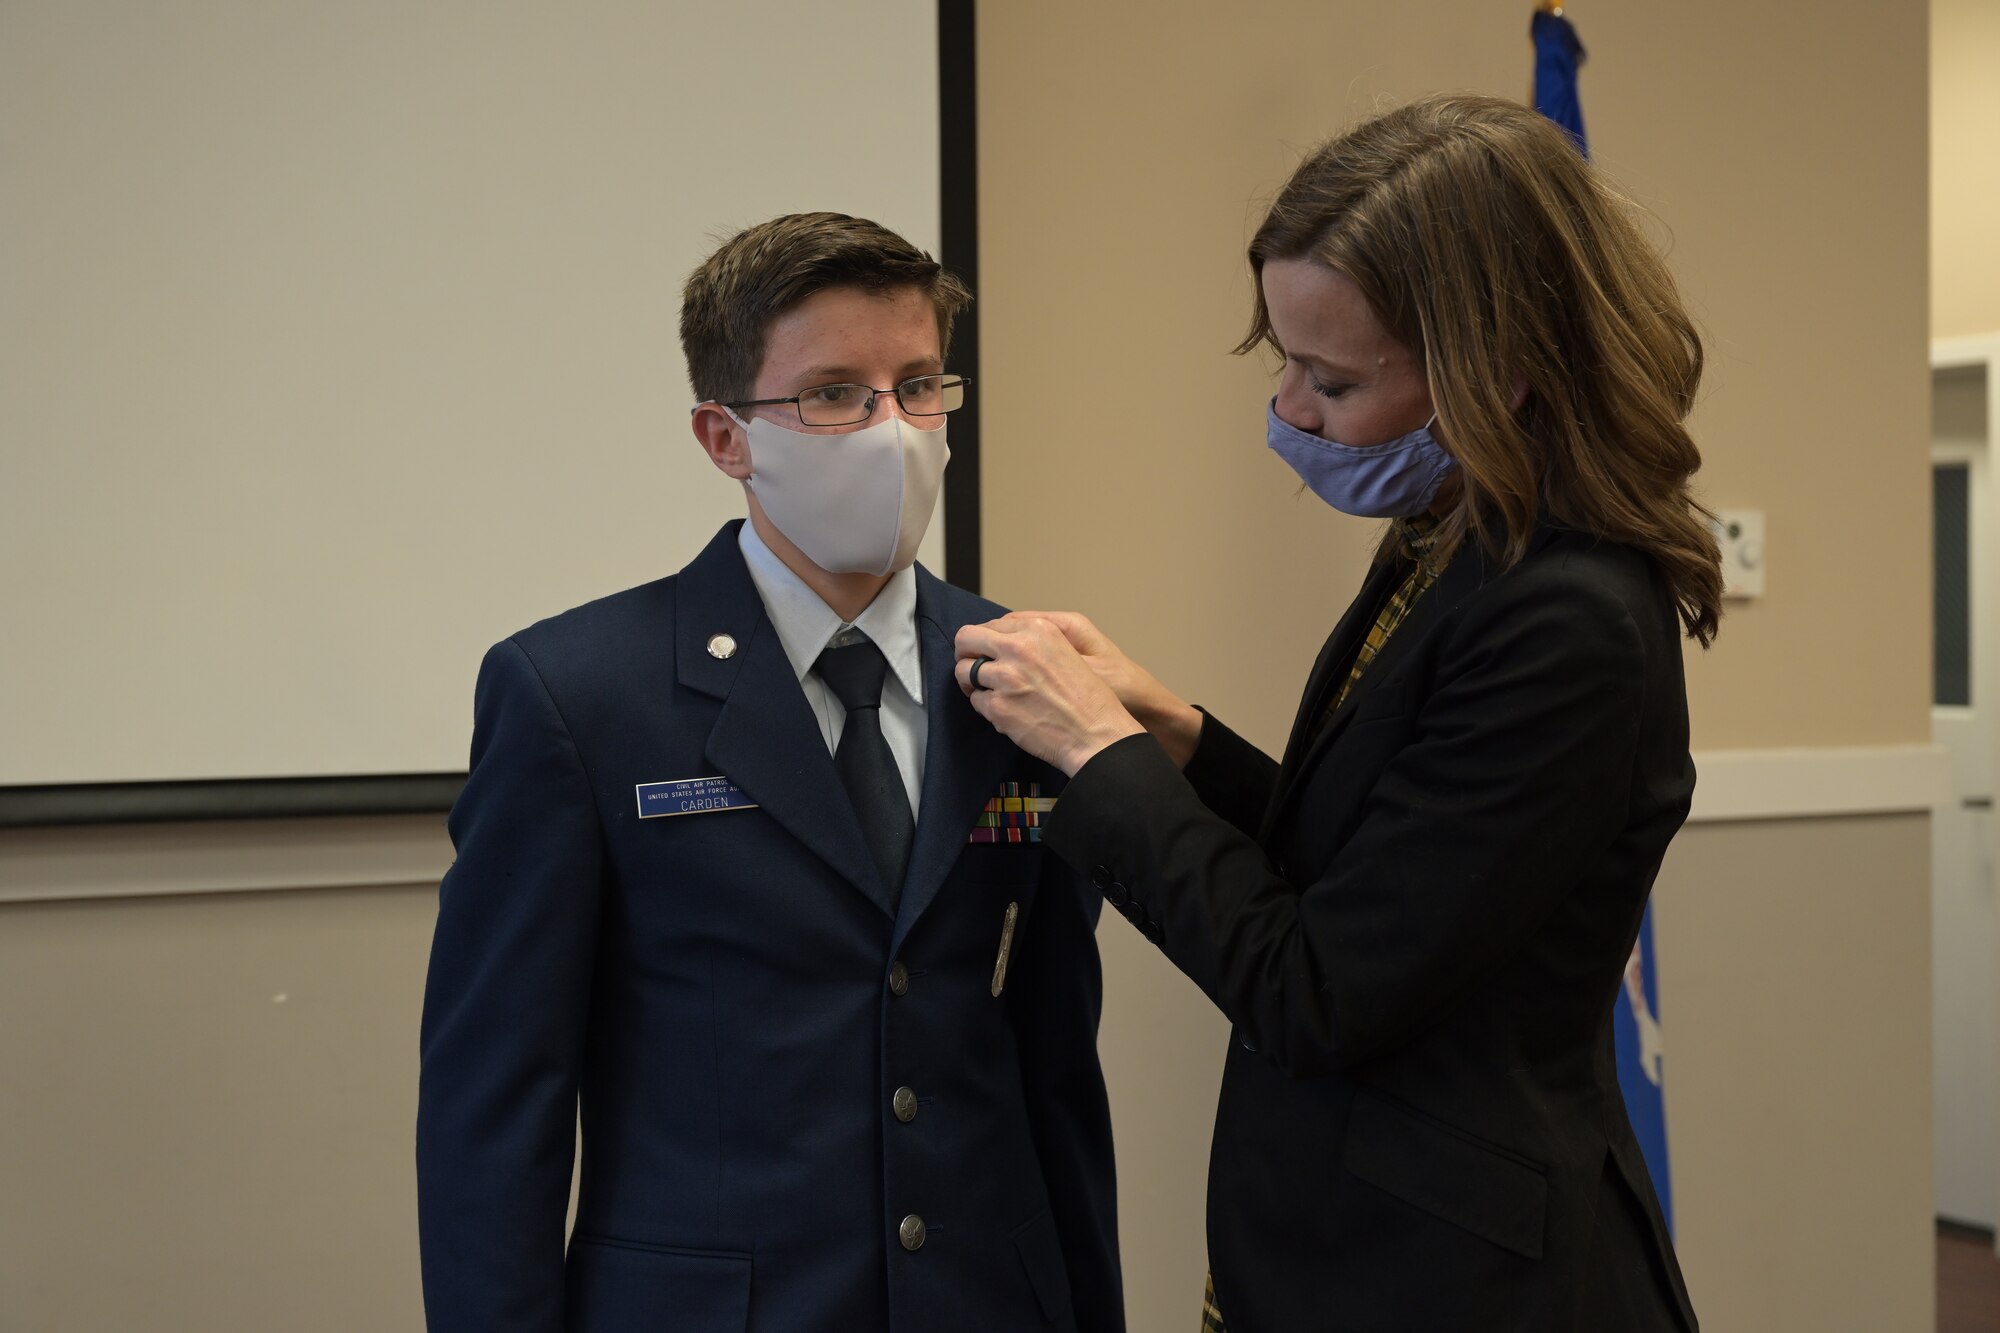 Golden Triangle Composite Squadron Civil Air Patrol cadet 2nd Lt. Matthew Carden, incoming cadet commander is pinned by his mother, Kristina Carden, during a change of command ceremony, Apr.1, 2021, on Columbus Air Force Base, Miss. Nationally there is almost 21,000 cadets and 33,000 senior members in numerous squadrons servicing the communities, state, and Nation as volunteers. (U.S. Air Force photo by Airman 1st Class Jessica Haynie)